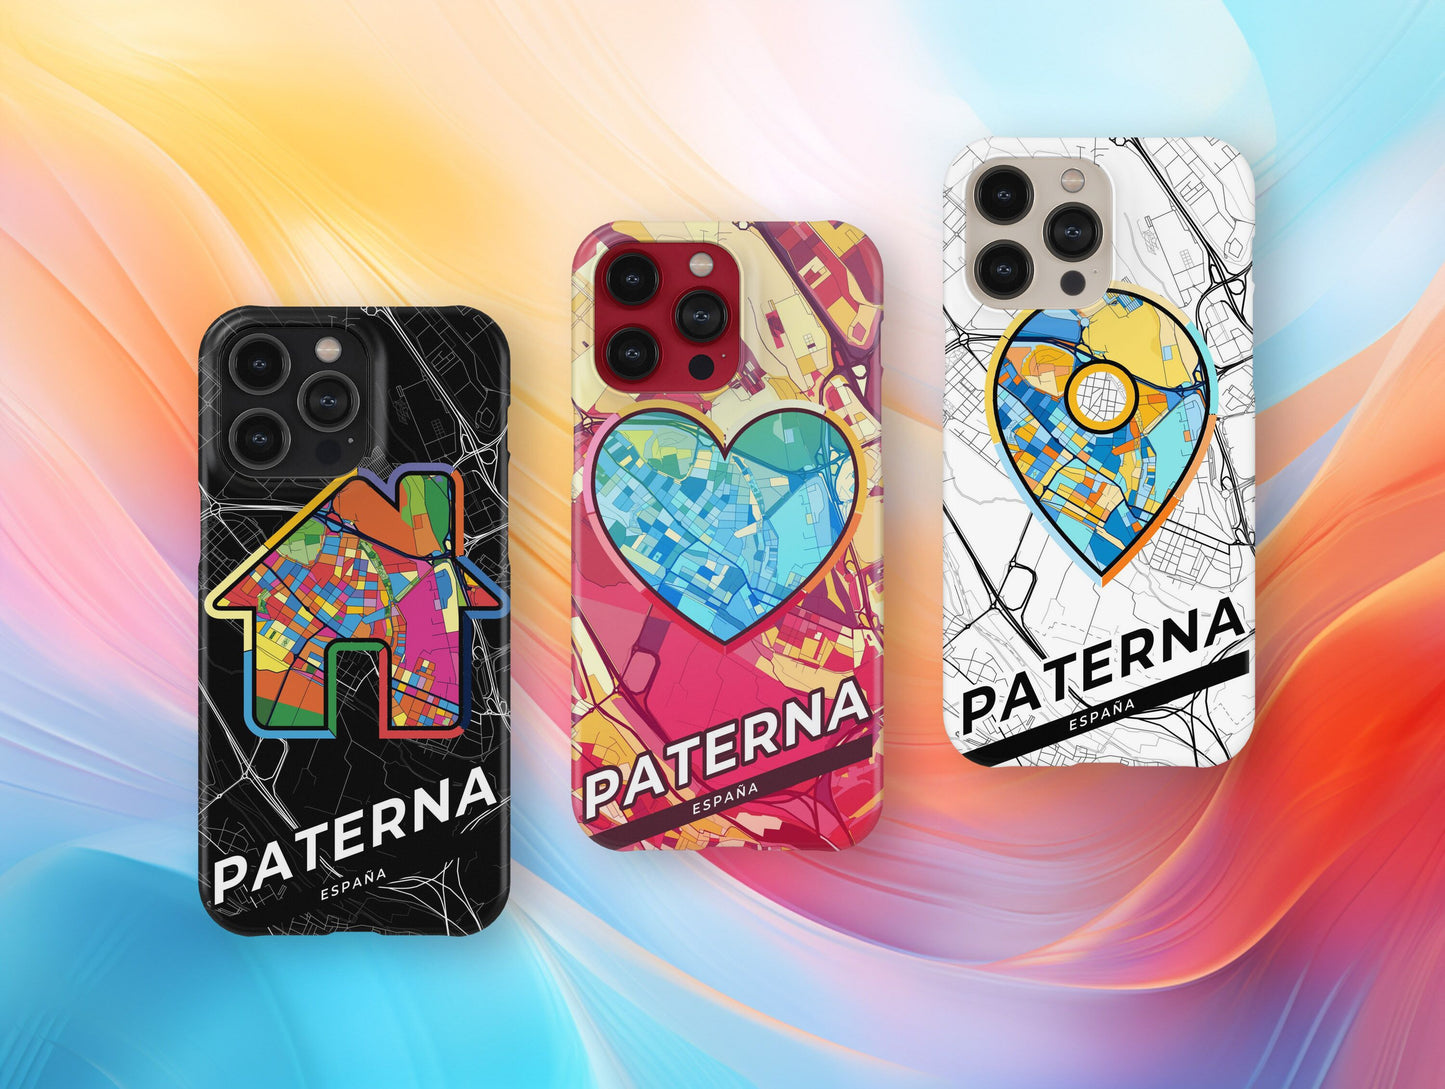 Paterna Spain slim phone case with colorful icon